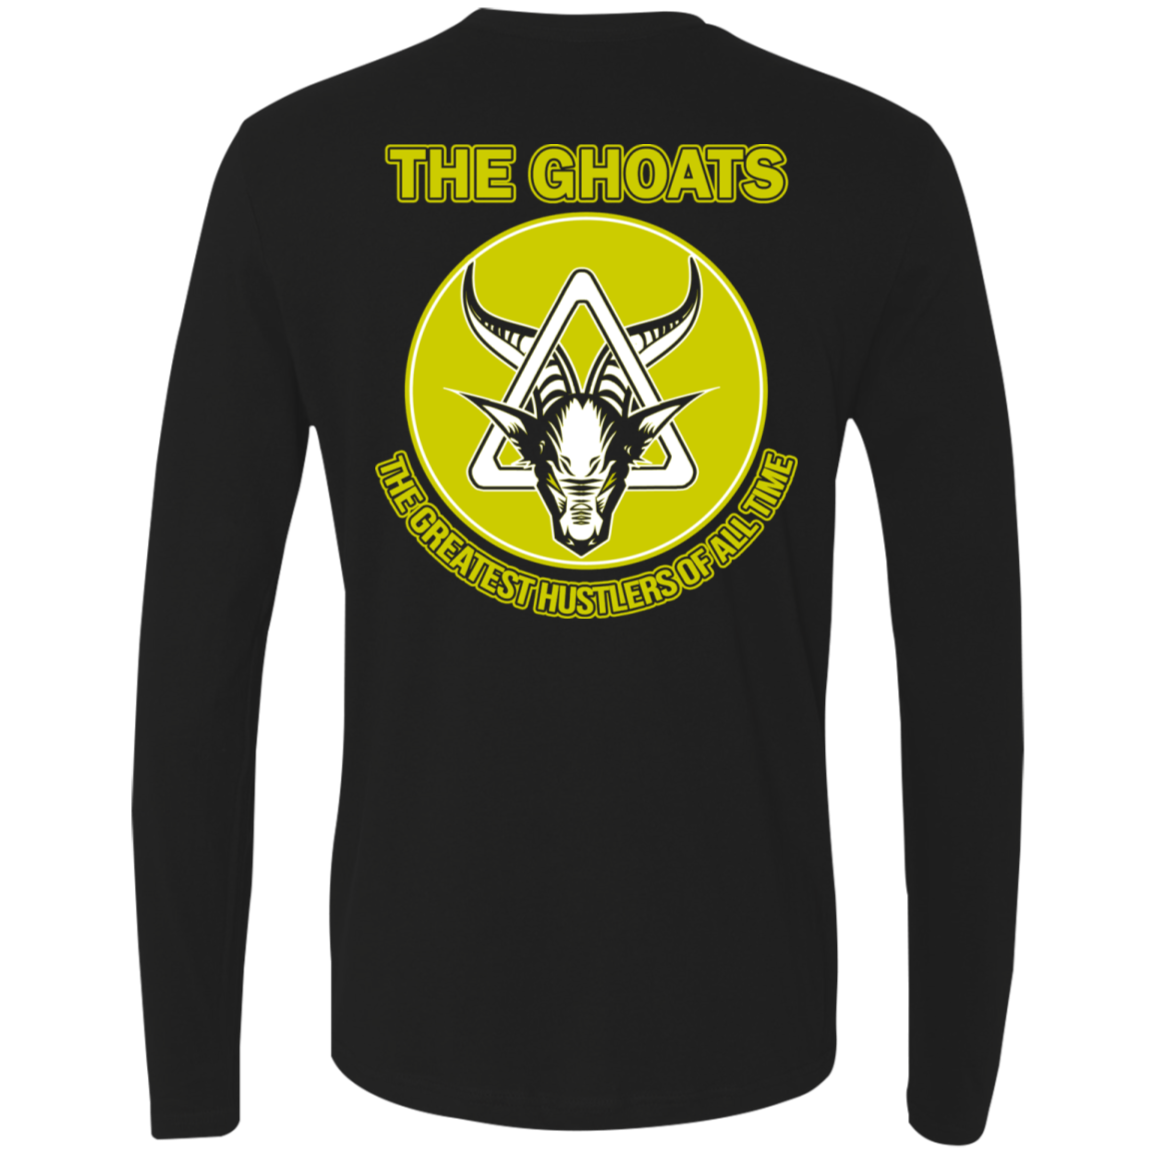 The GHOATS Custom Design #8. Eat Sleep Play 8 ball Play 9 ball Repeat. Ultra Soft Fitted Men's Long Sleeve